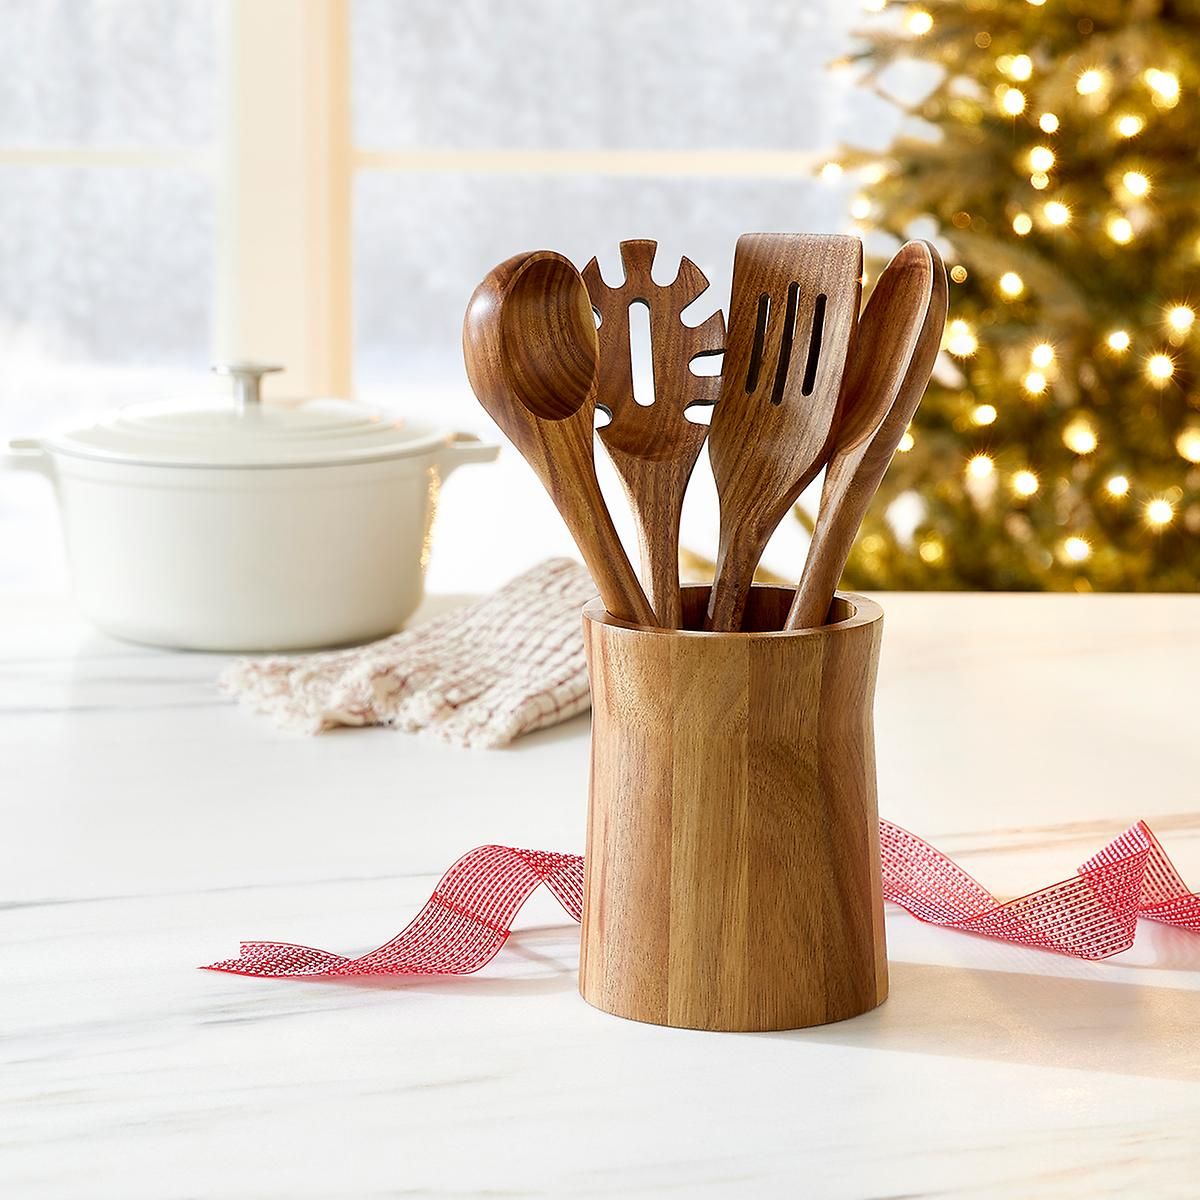 Utensil Gift Set | The Container Store